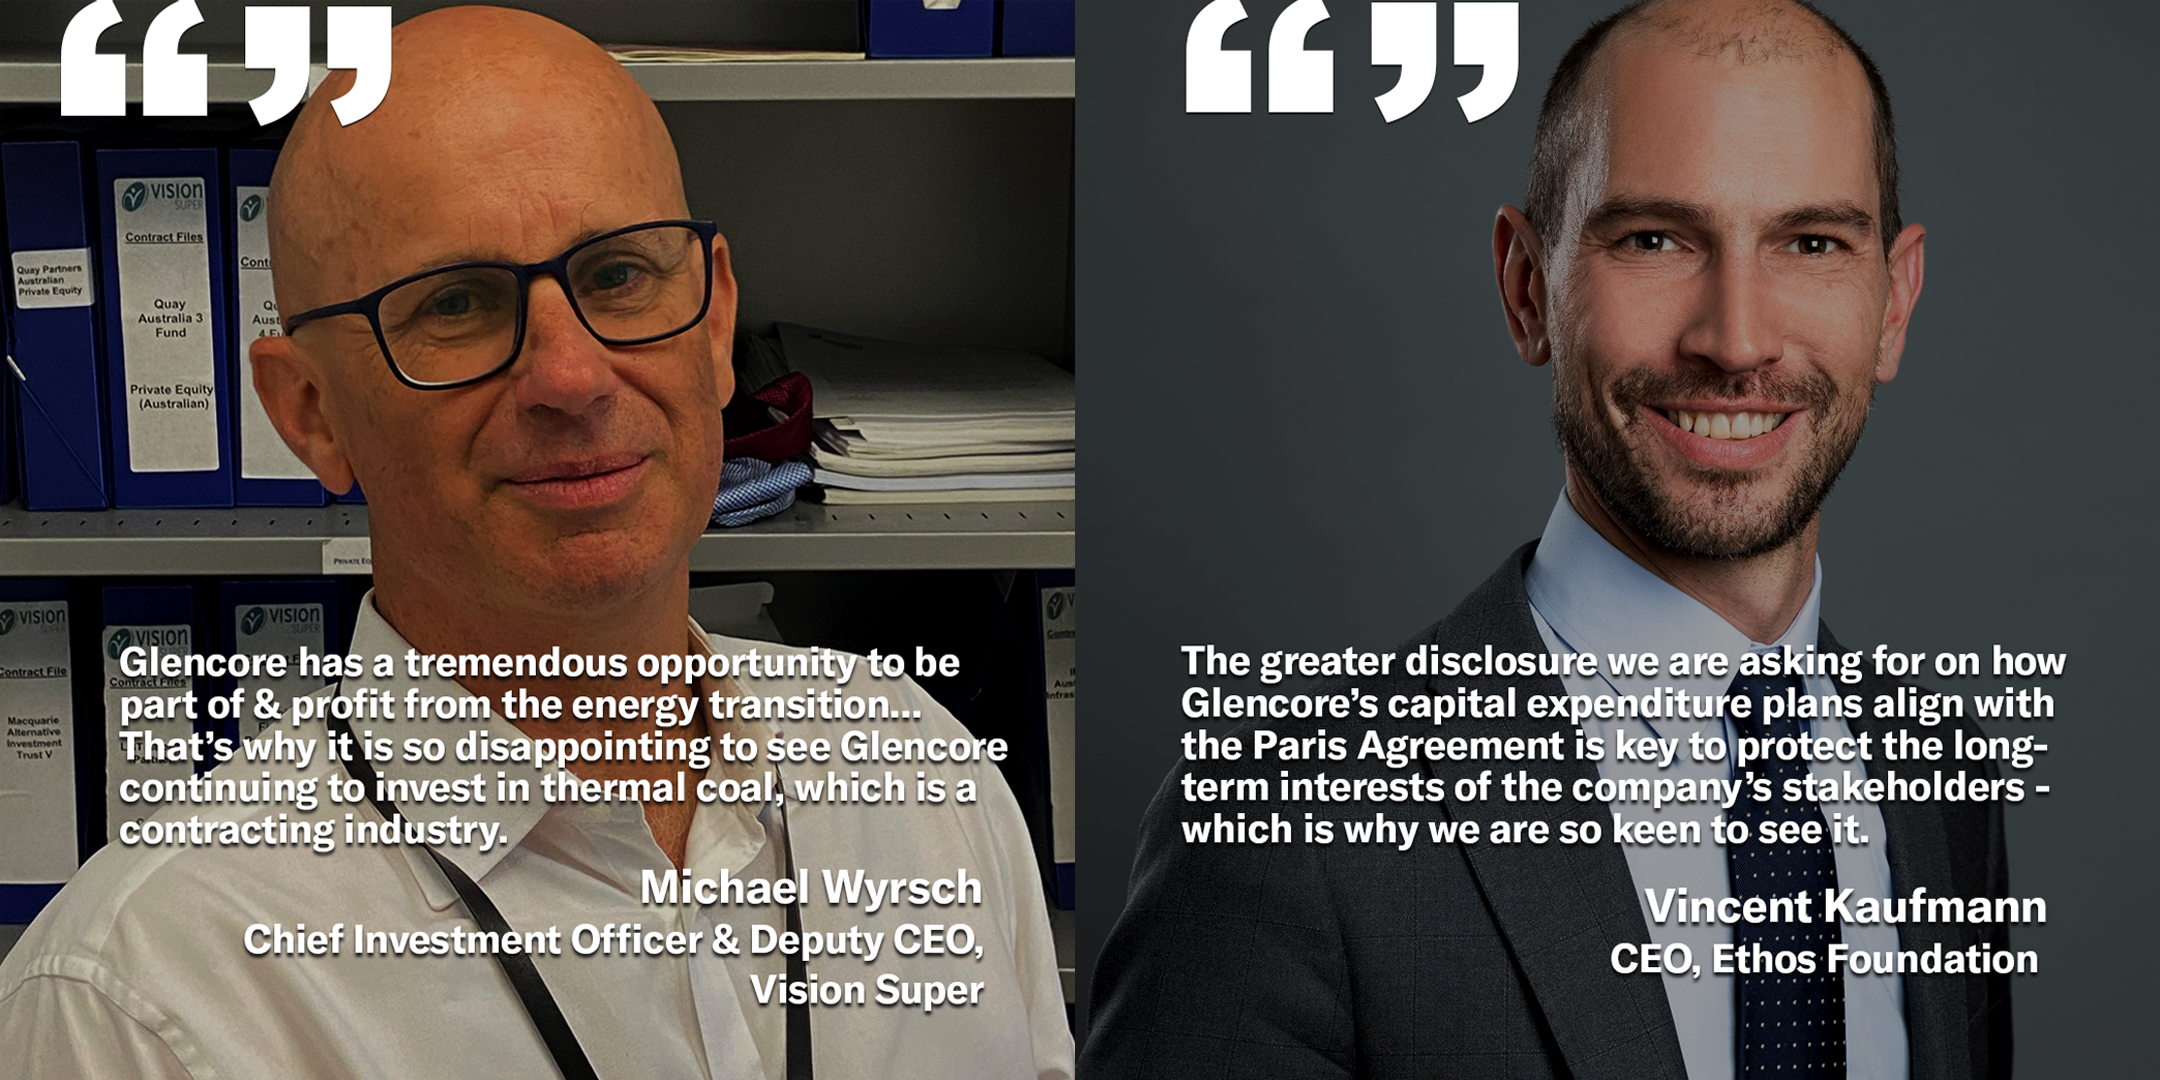 Two quotes about supporting the resolution from Vision Super & the Ethos Foundation